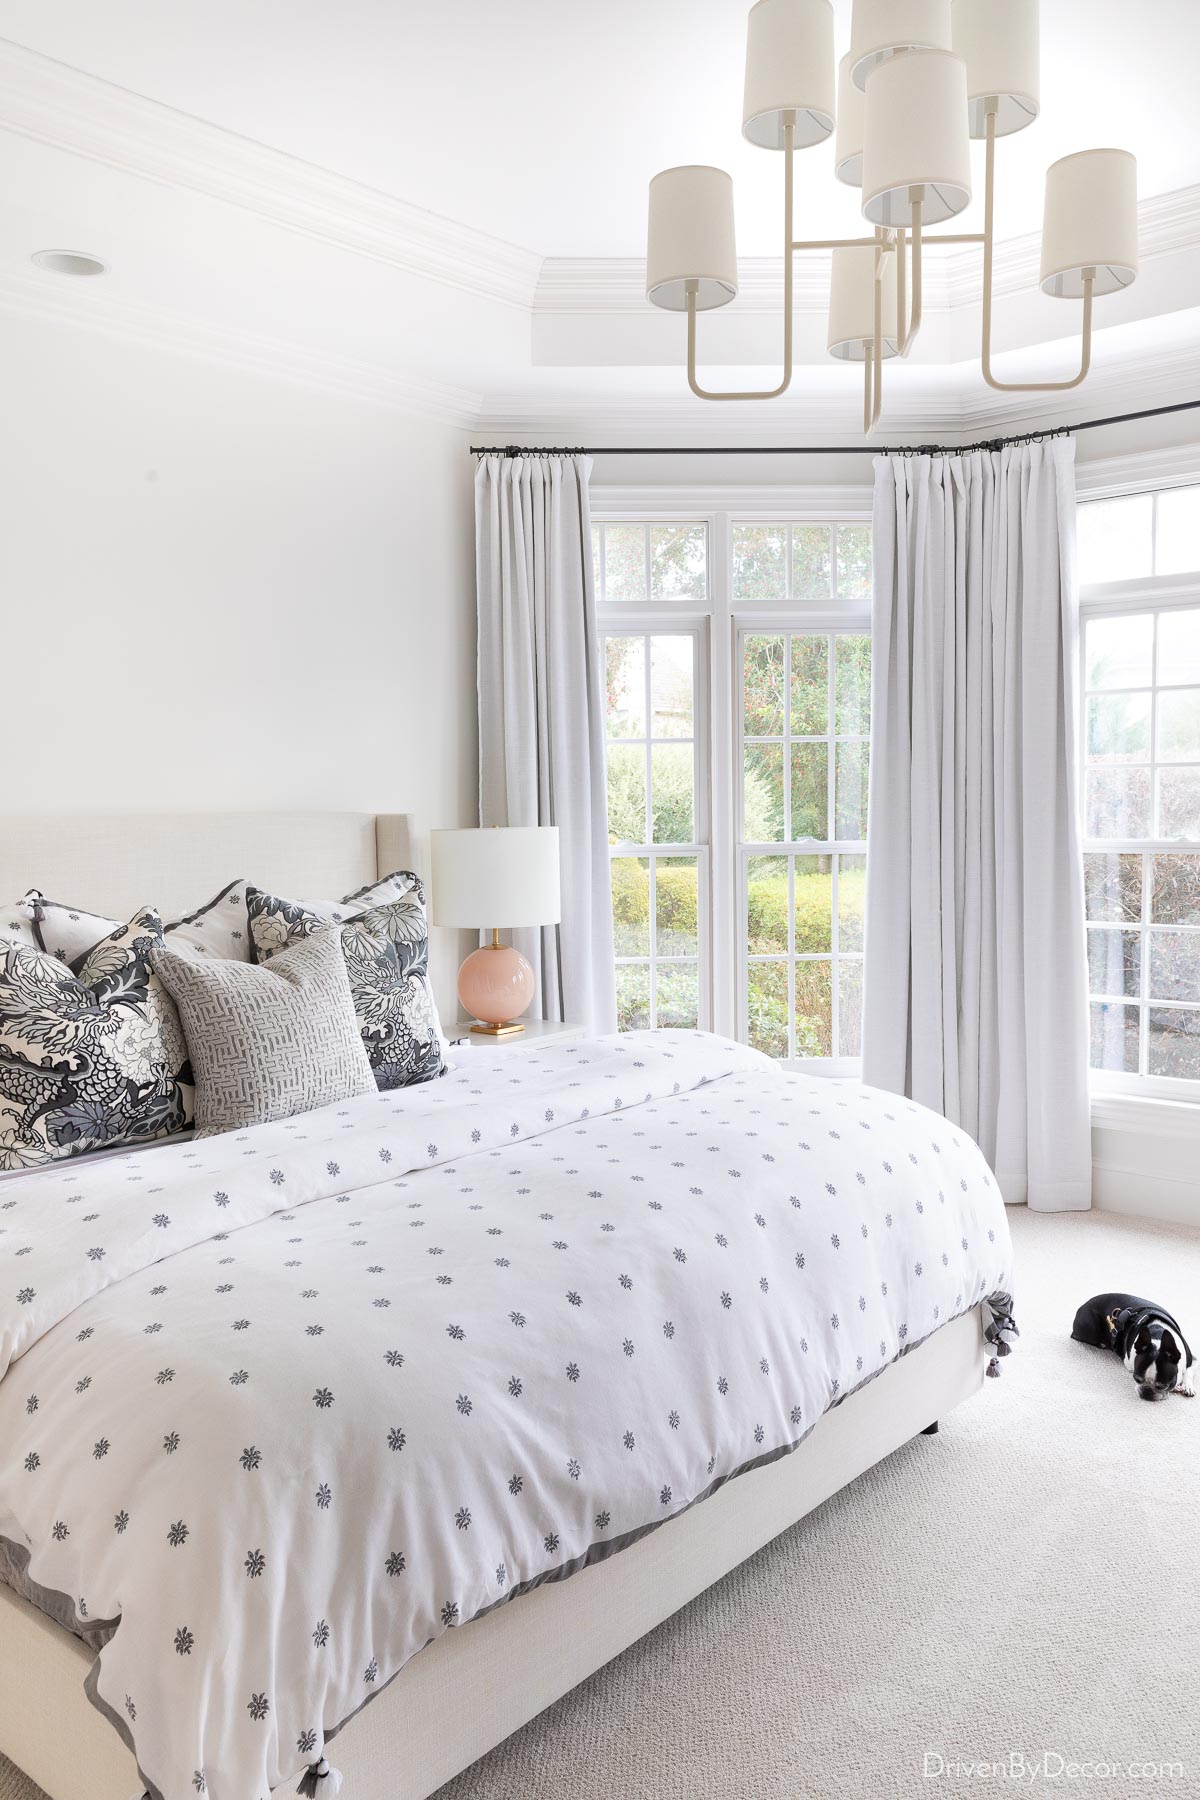 Guest room bedding in shades of gray in bedroom with tall windows and chandelier